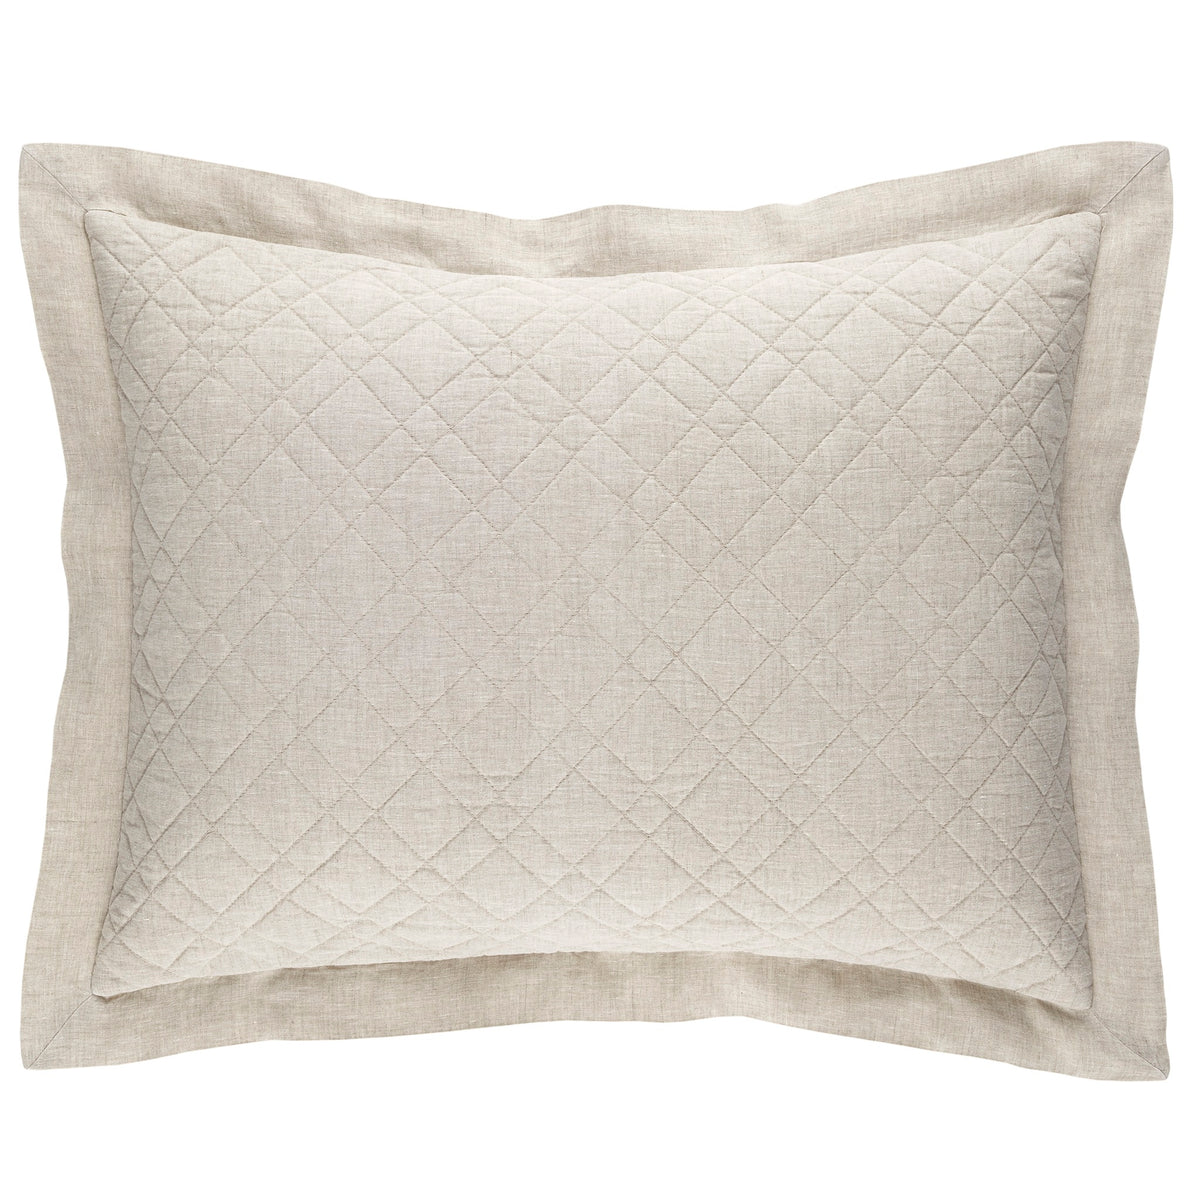 Sham of Pine Cone Hill Washed Linen Quilted Bedding in Color Natural